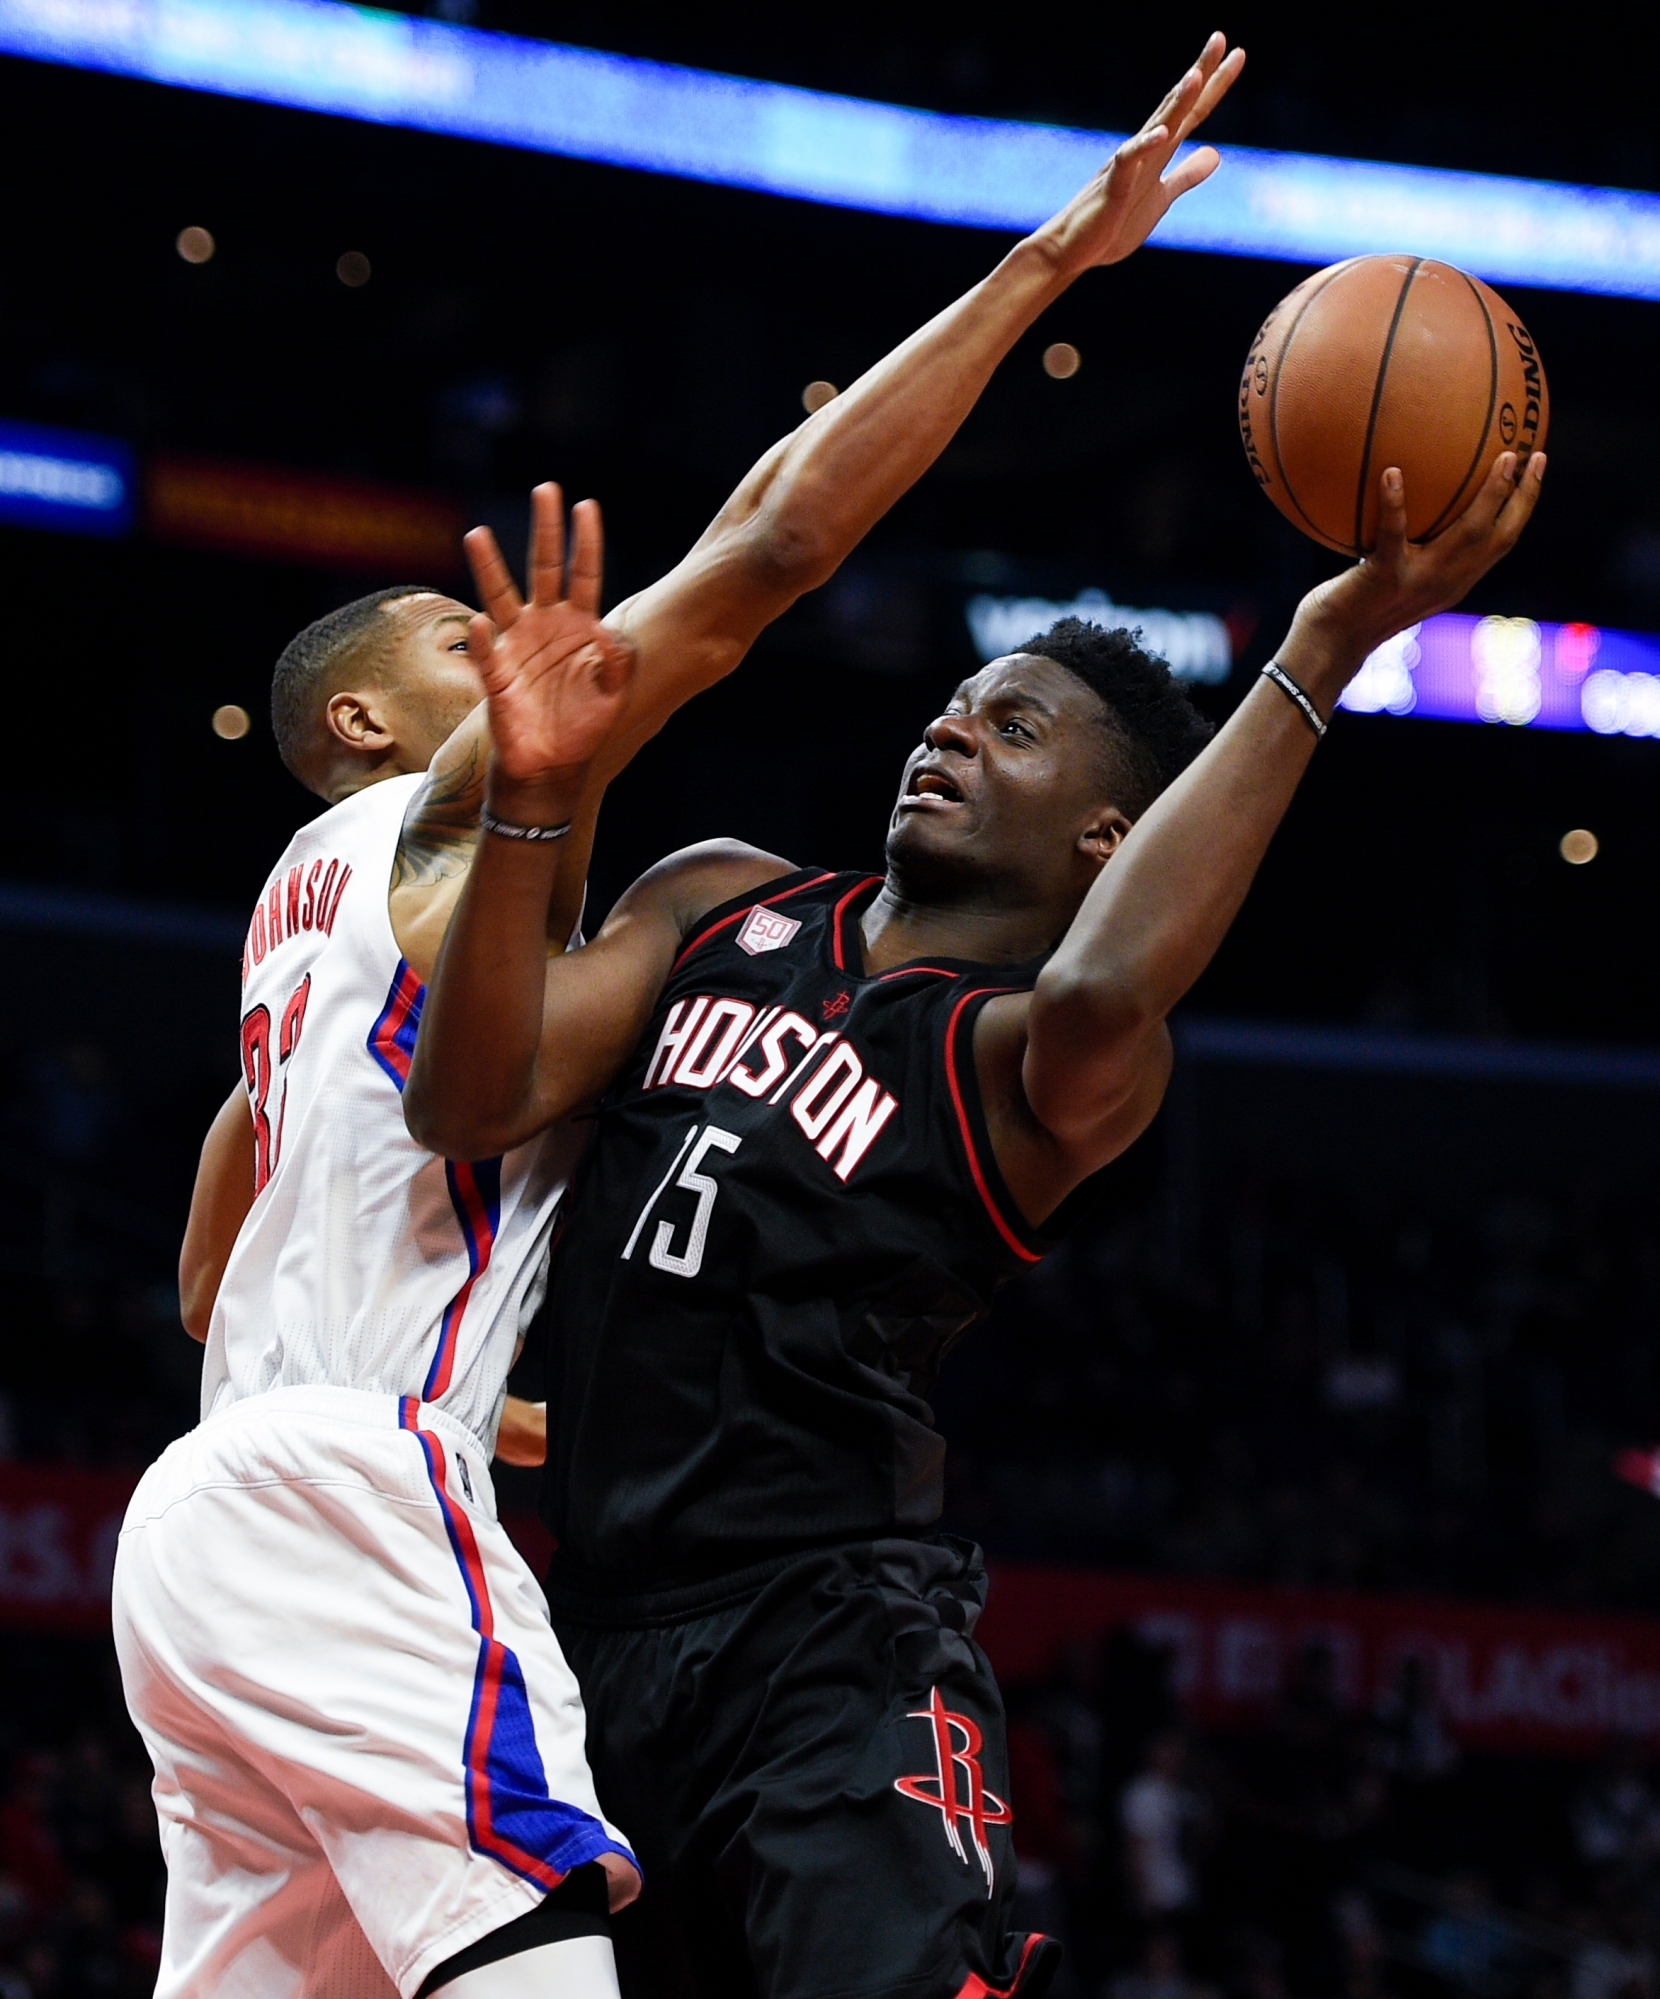 Houston Rockets center Clint Capela, right, attempts a shot defended by Los Angeles Clippers forward Wesley Johnson during the second half of an NBA basketball game in Los Angeles, Wednesday, March 1, 2017. The Rockets won 122-103. (AP Photo/Kelvin Kuo)Clint Capela ROCKETS CLIPPERS BASKETBALL